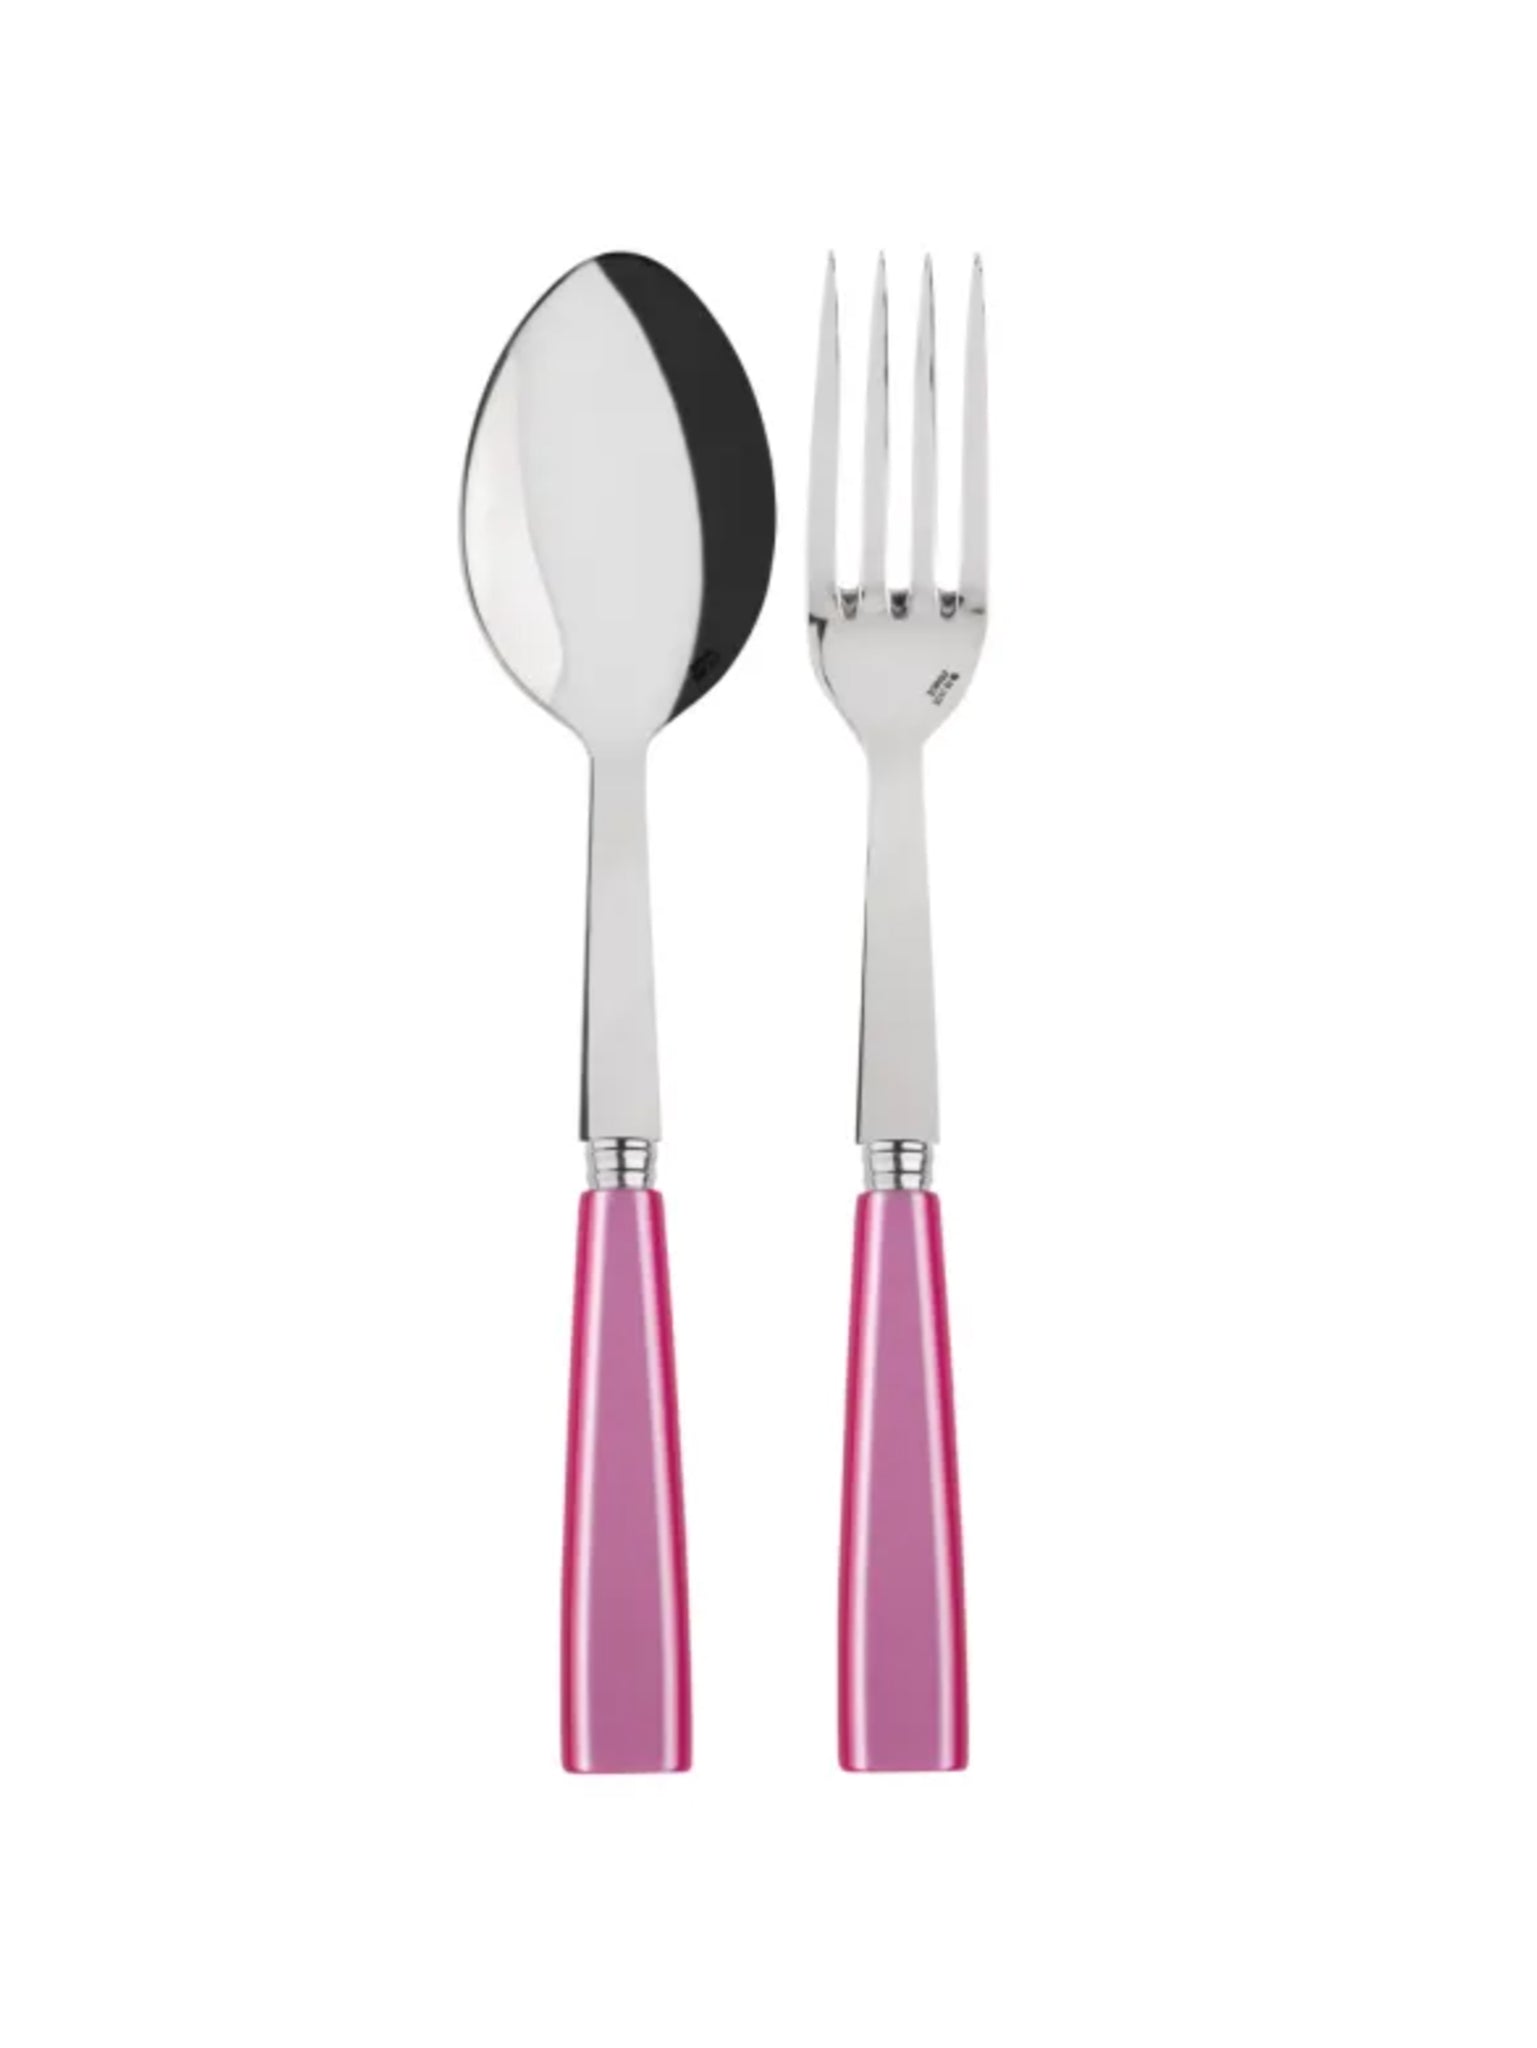 Sabre Pairs Icone Pink Candy Serving Set Weston Table